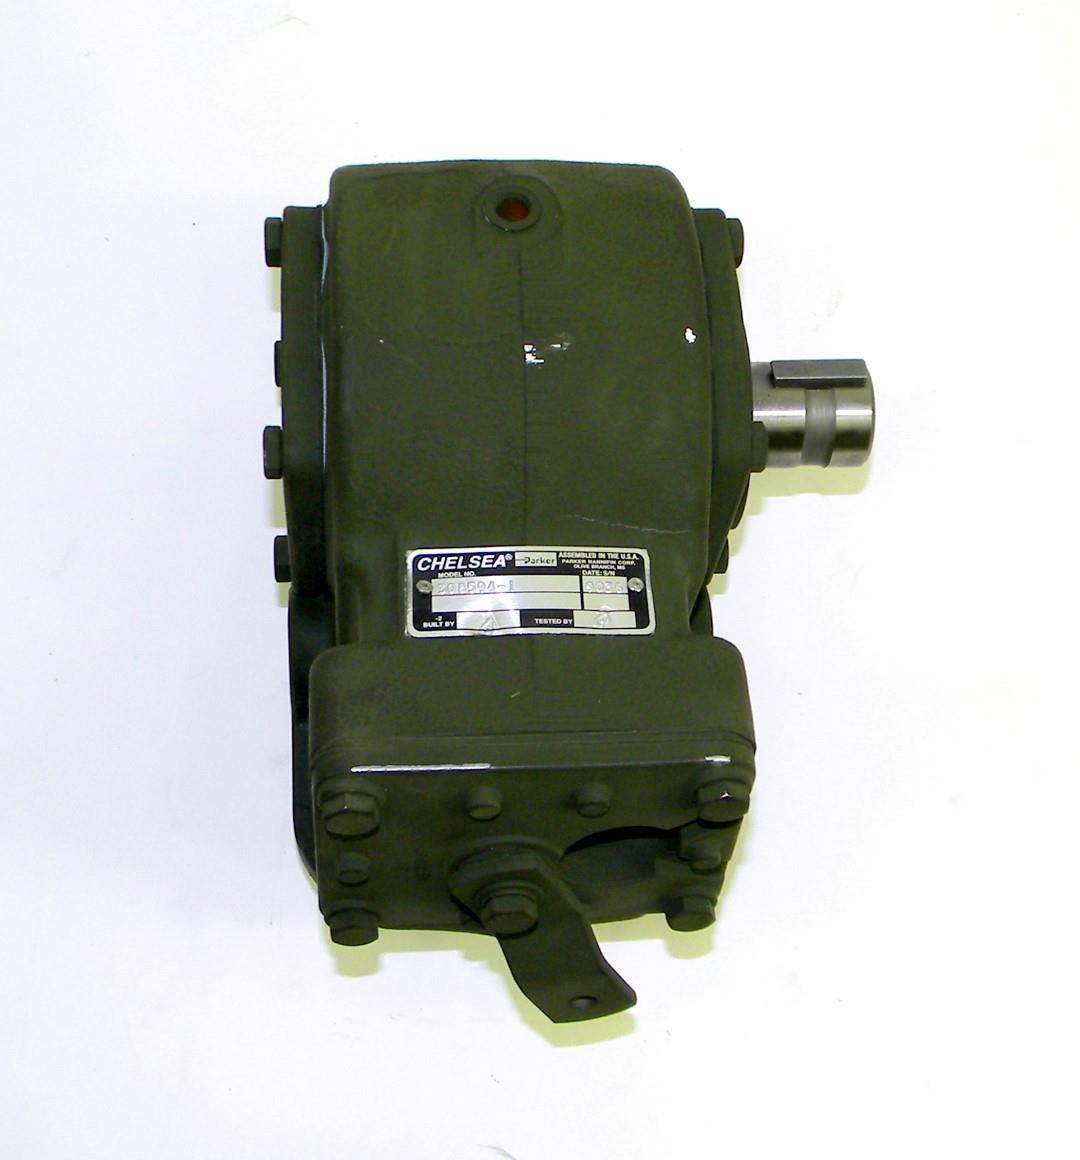 9M-789 | 2520-01-543-6940 Transmission Mounted Power Take Off for M939 and M939A1 Series 5 Ton NOS (8).JPG